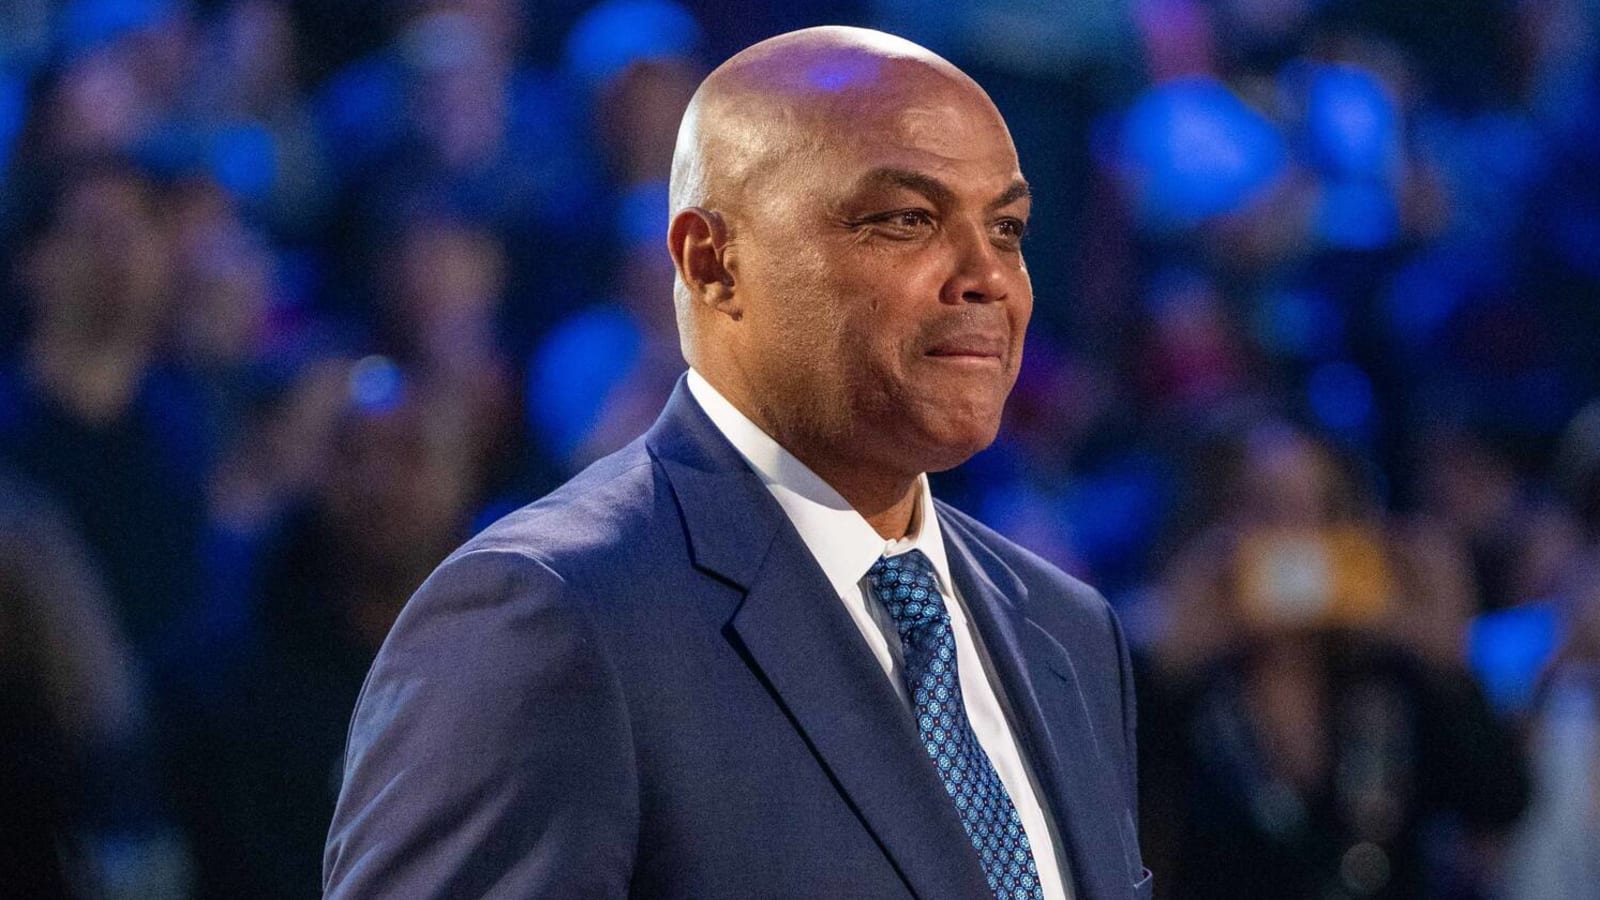 Watch: Charles Barkley shows up to Warriors-Mavericks game riding a horse